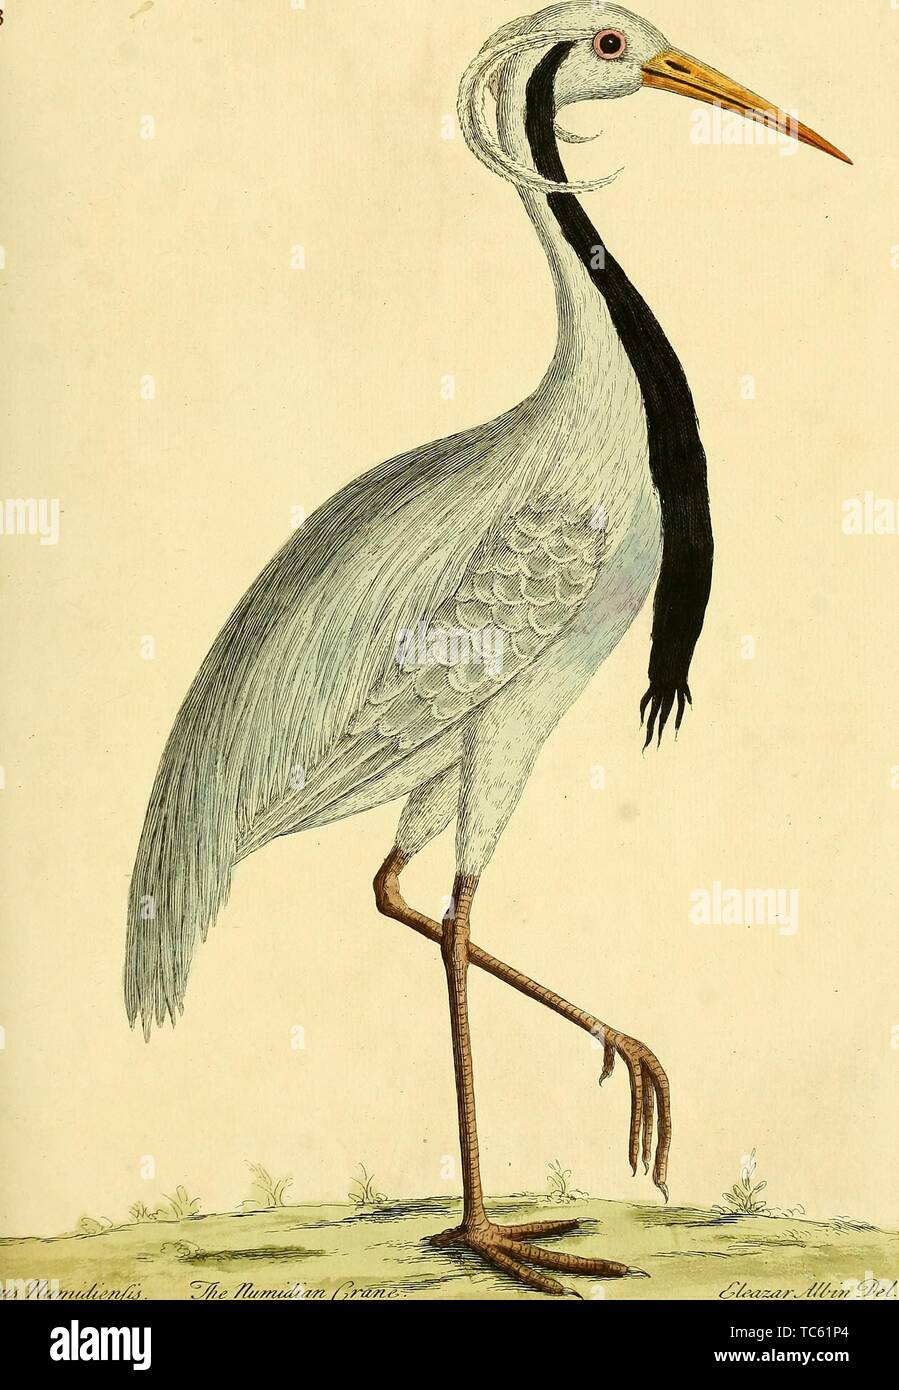 Engraving of the Numidian Crane (Grus Numidiensis), from the book 'A natural history of birds' by Eleazar Albin, William Derham, and Jonathan Dwight, 1731. Courtesy Internet Archive. () Stock Photo